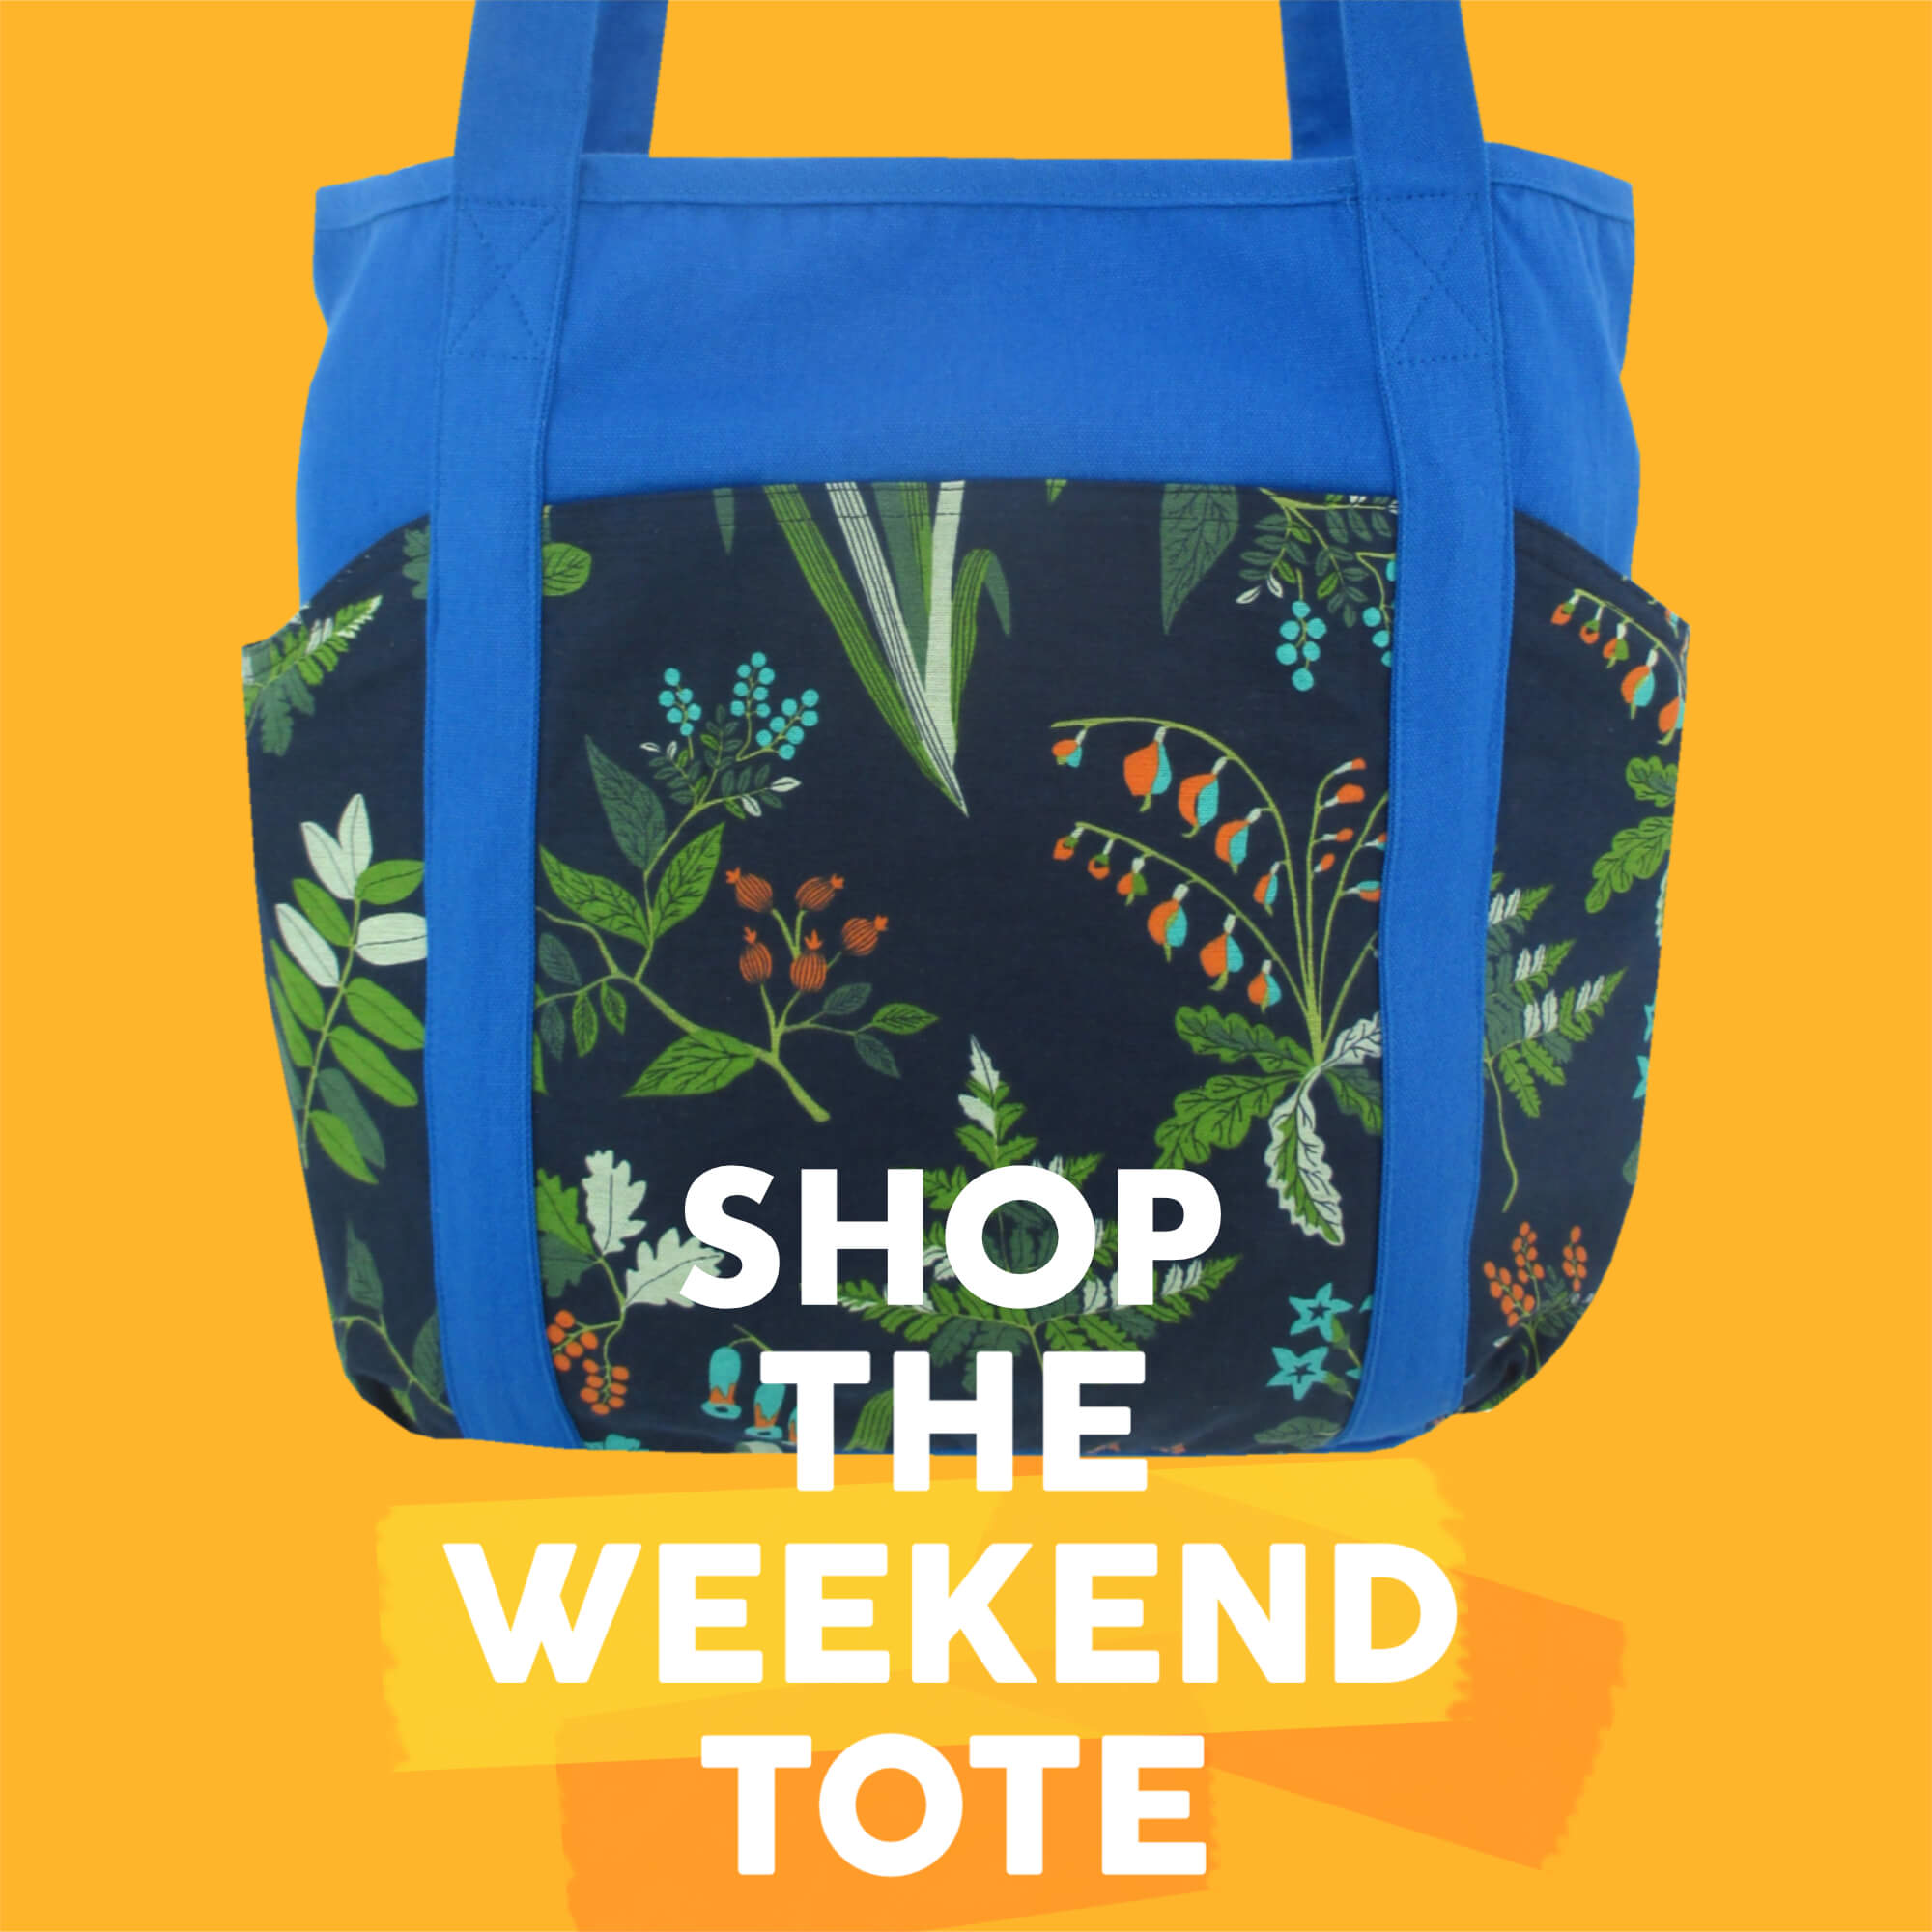 An all purpose utility tote with plenty of pockets and room for storage You'll be amazed at how much you can fit into our classic weekend tote. It features  two side pockets that are the perfect size for your water bottle and umbrella. And two additional front and back pockets so you'll always have easy access to the things you need in a hurry.